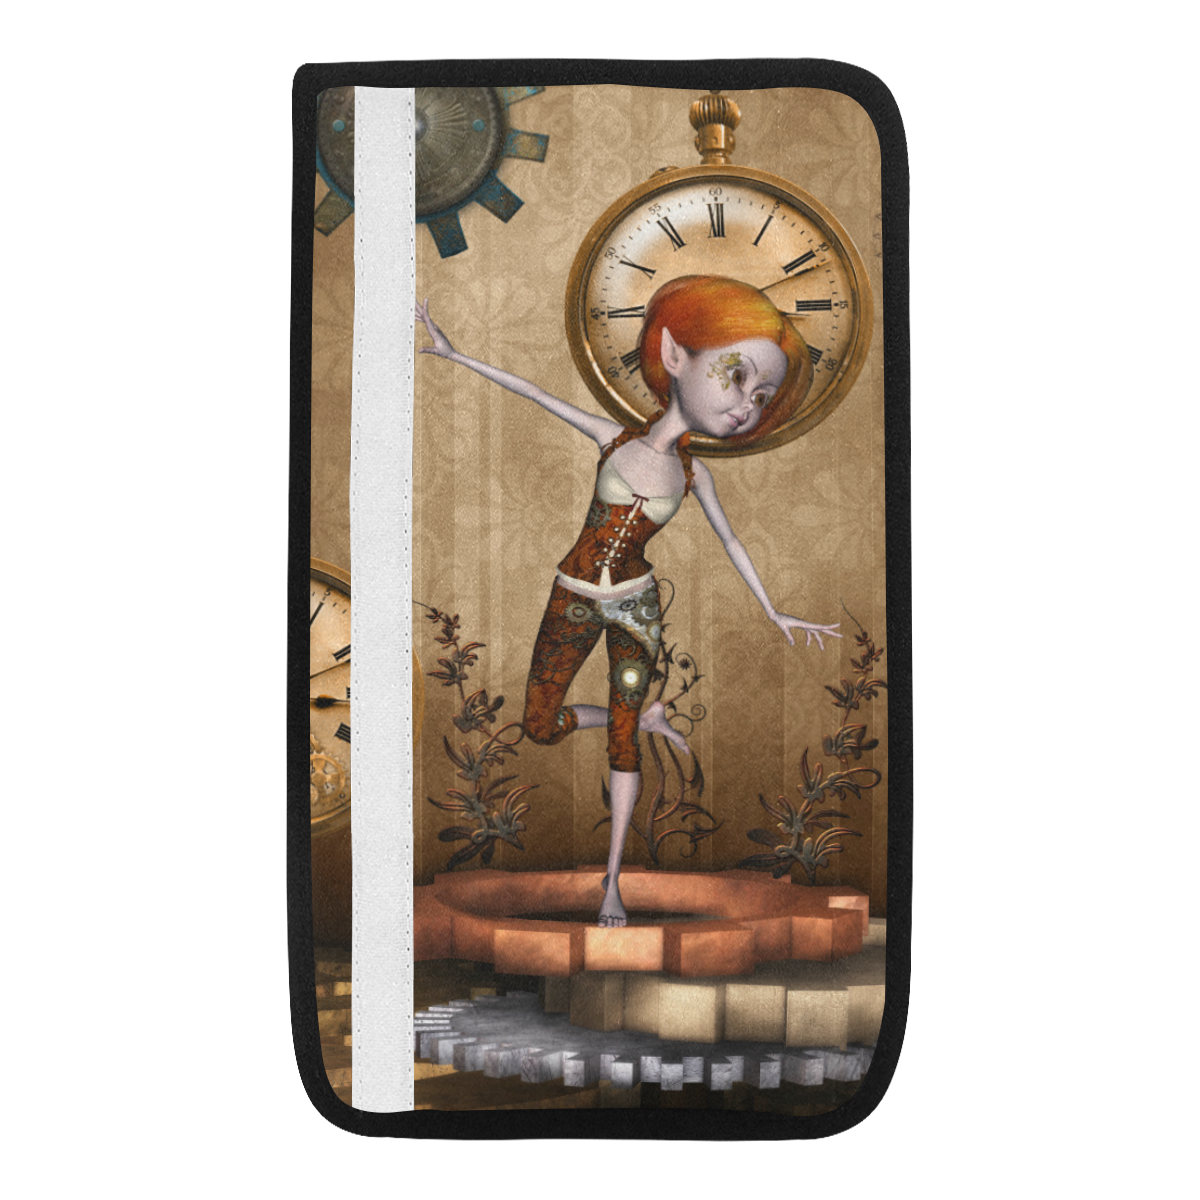 Steampunk girl, clocks and gears Car Seat Belt Cover 7''x12.6''